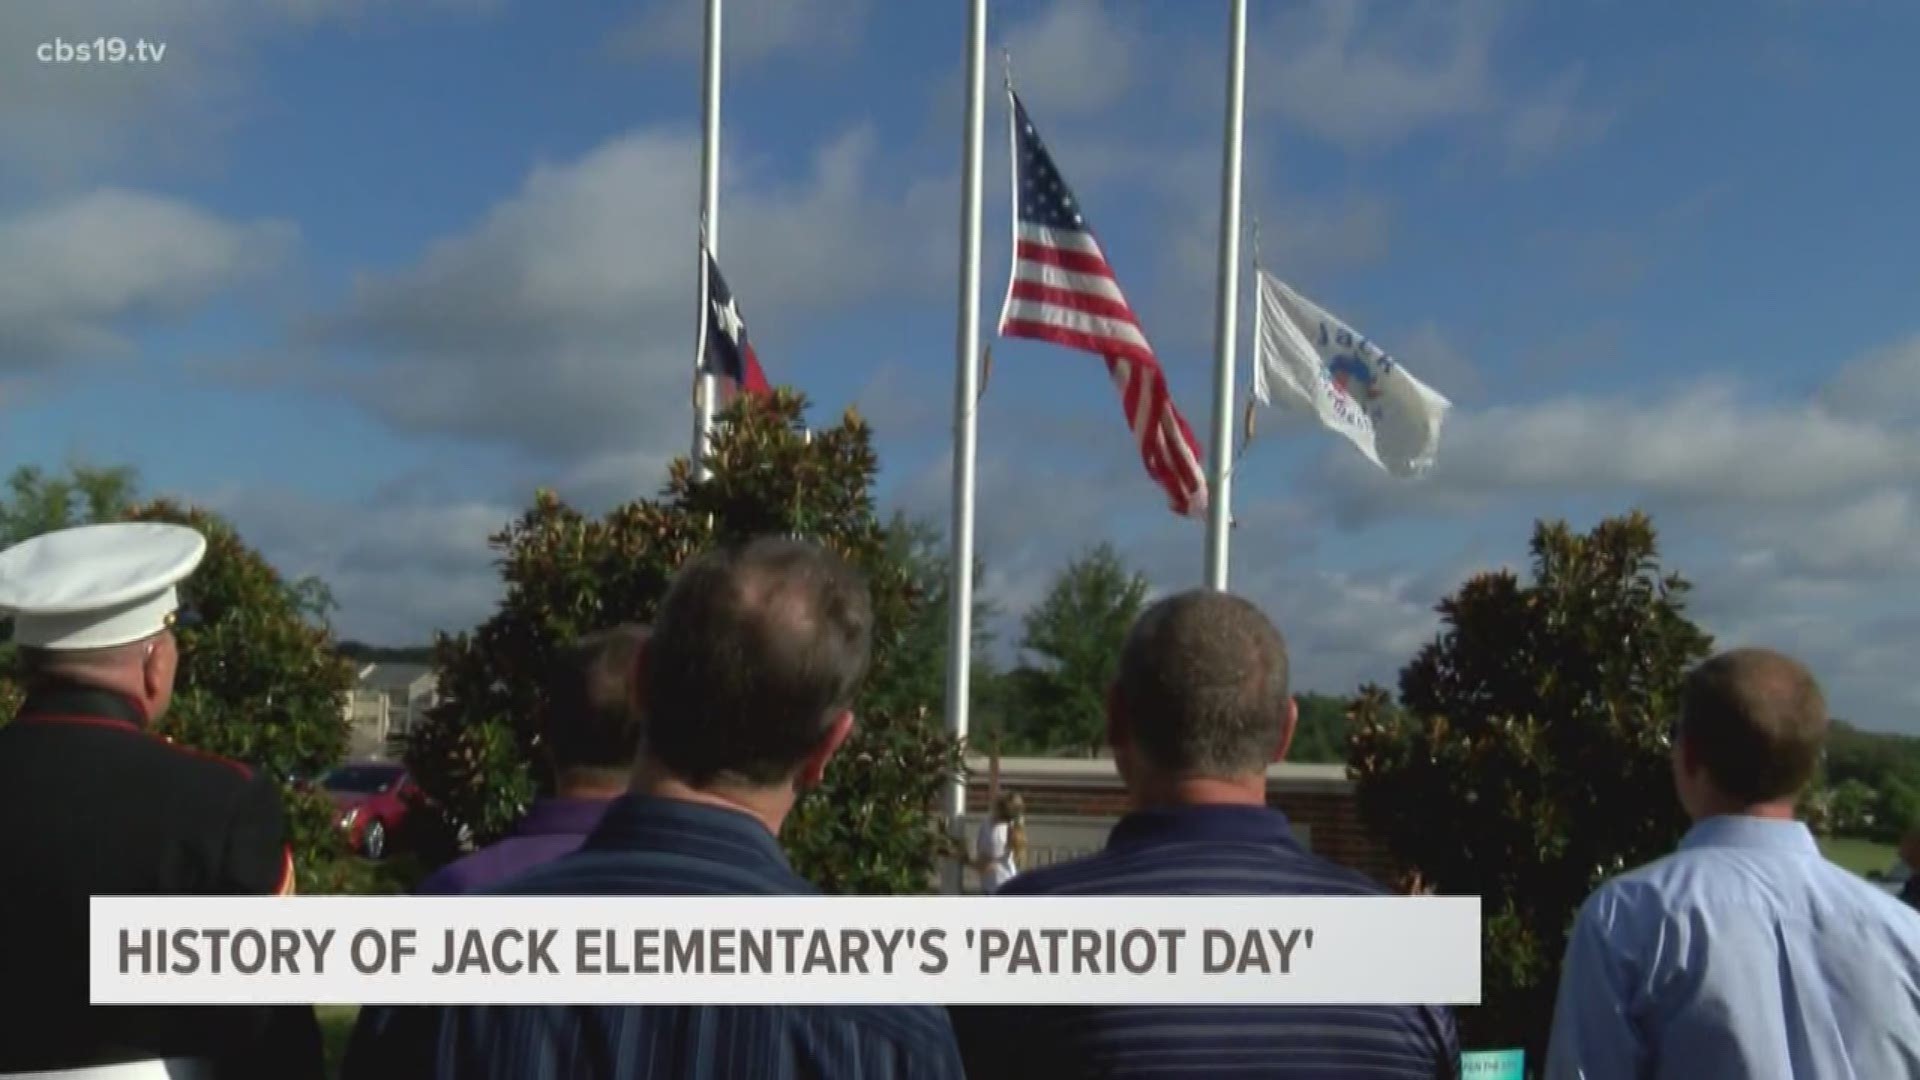 Every year, Jack Elementary School hosts a ‘Patriot Day’ to honor 9/11 victims including the school’s namesake.